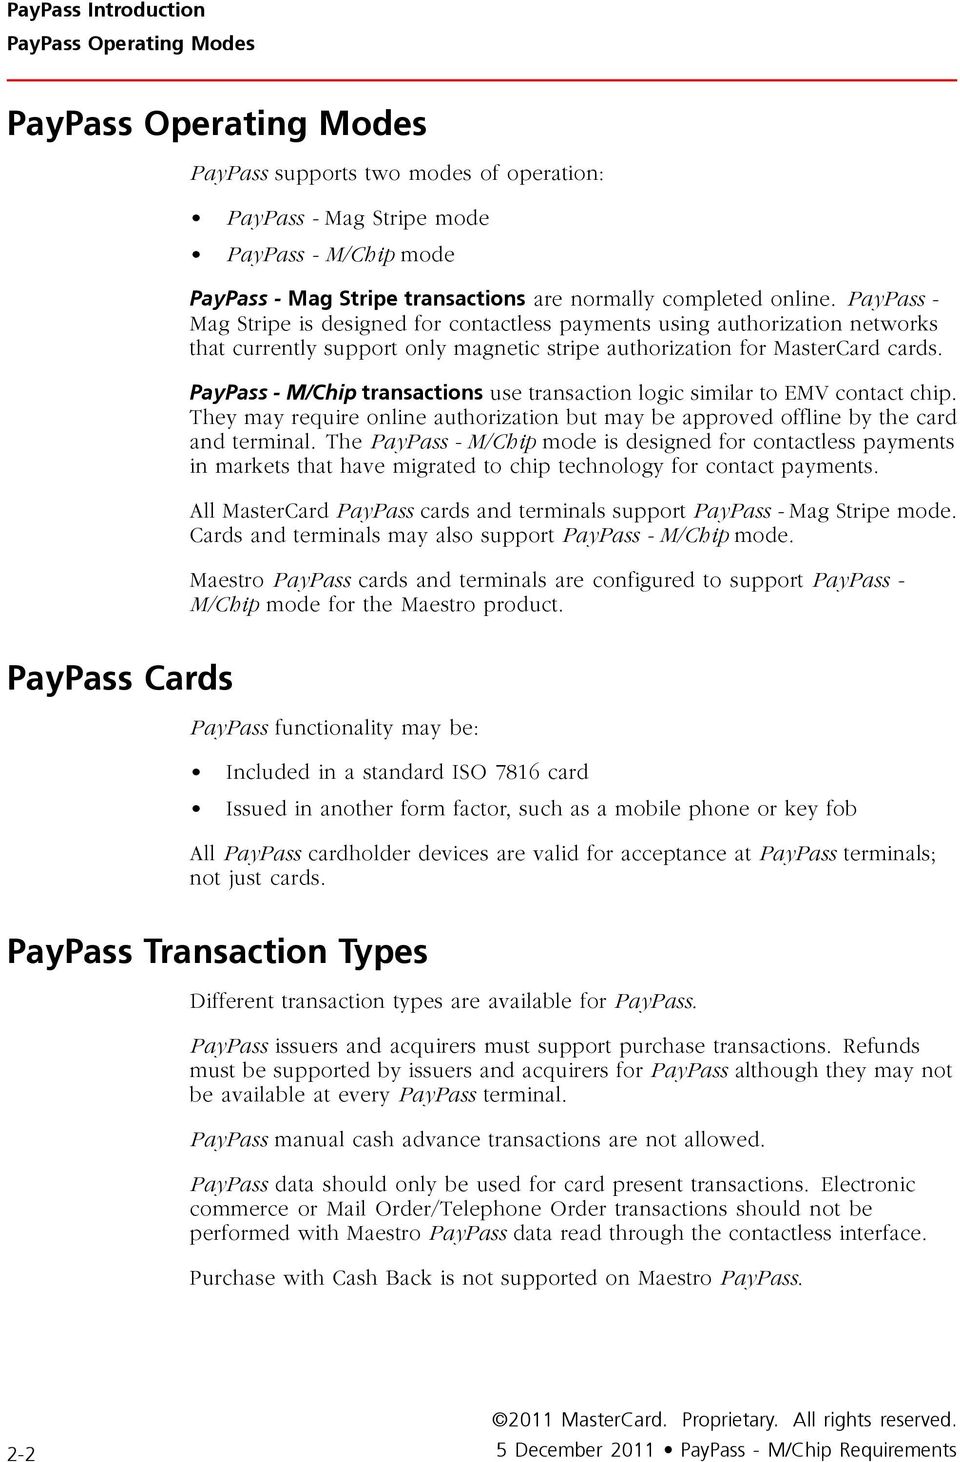 PayPass - M/Chip transactions use transaction logic similar to EMV contact chip. They may require online authorization but may be approved offline by the card and terminal.